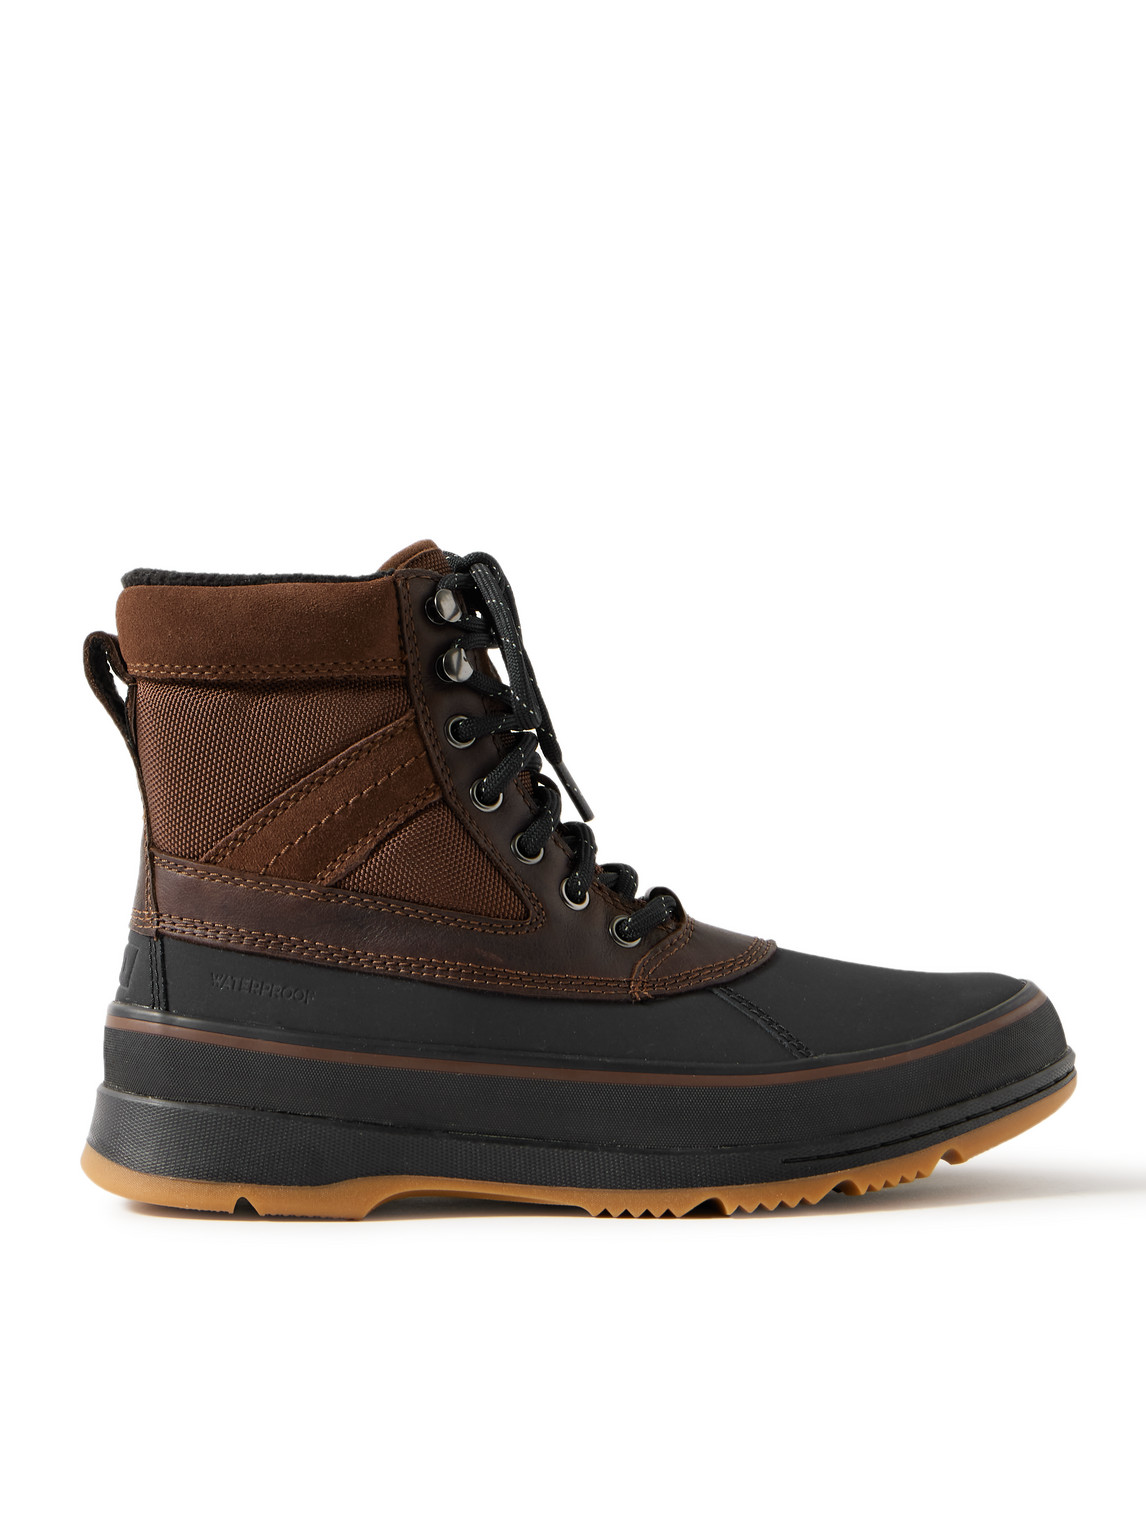 Sorel - Ankeny™ II Leather- and Suede-Trimmed Nylon and Rubber Boots - Men - Brown - US 9 von Sorel